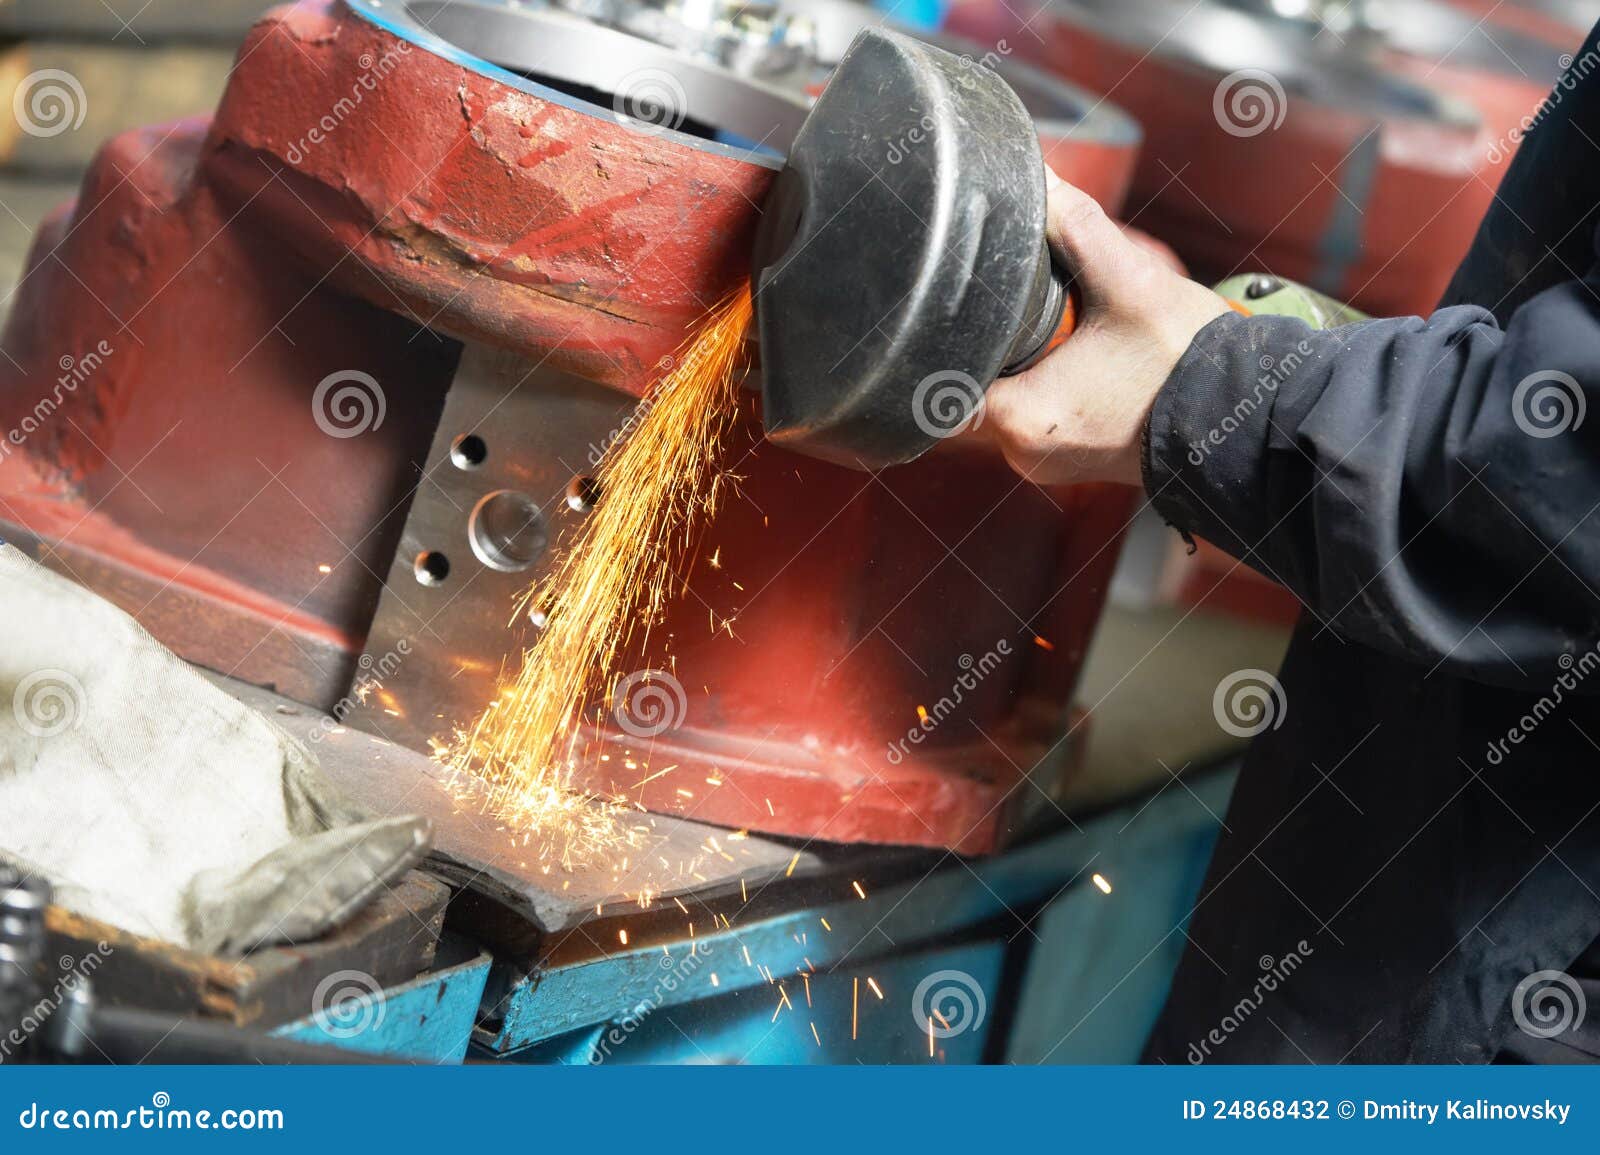 close-up grinding process with power tool